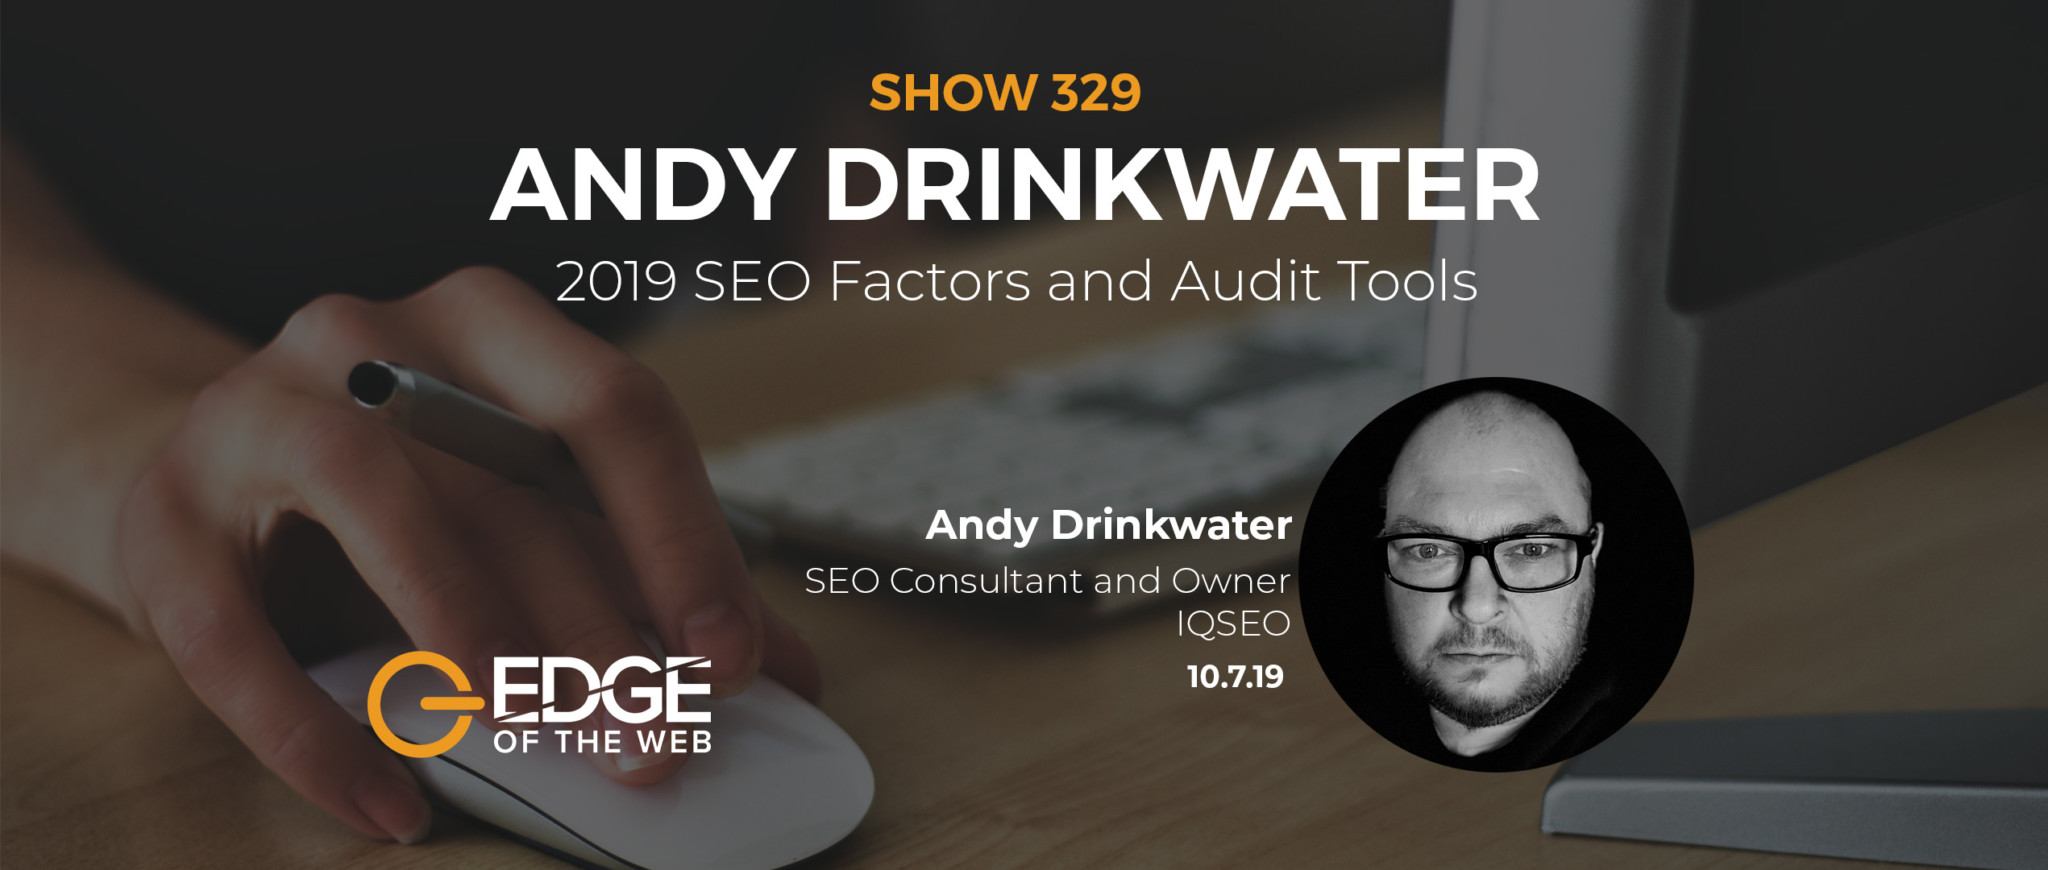 Show 329: 2019 SEO factors and audit tools, featuring Andy Drinkwater